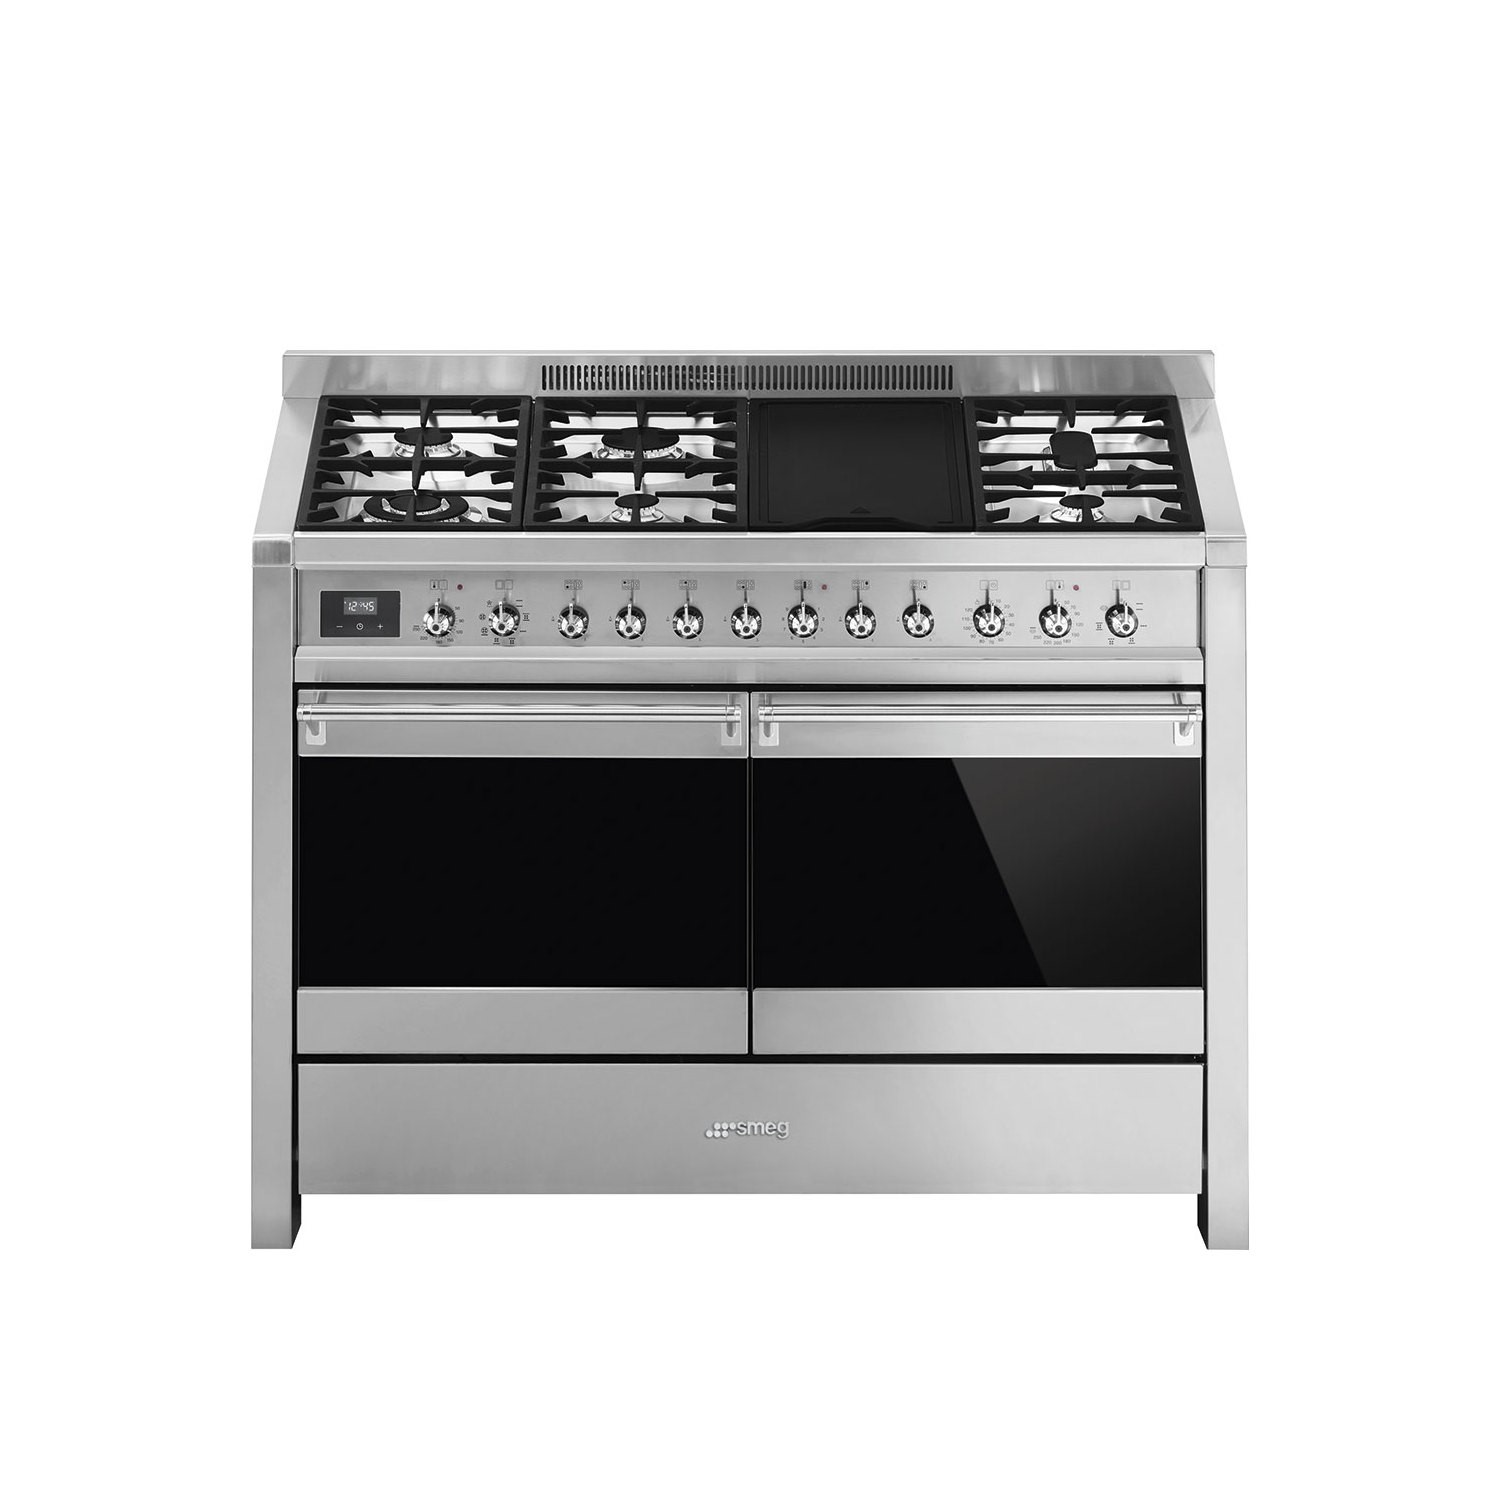 Refurbished Smeg Opera A4-81 120cm Dual Fuel Range Cooker with Electric Griddle Stainless Steel